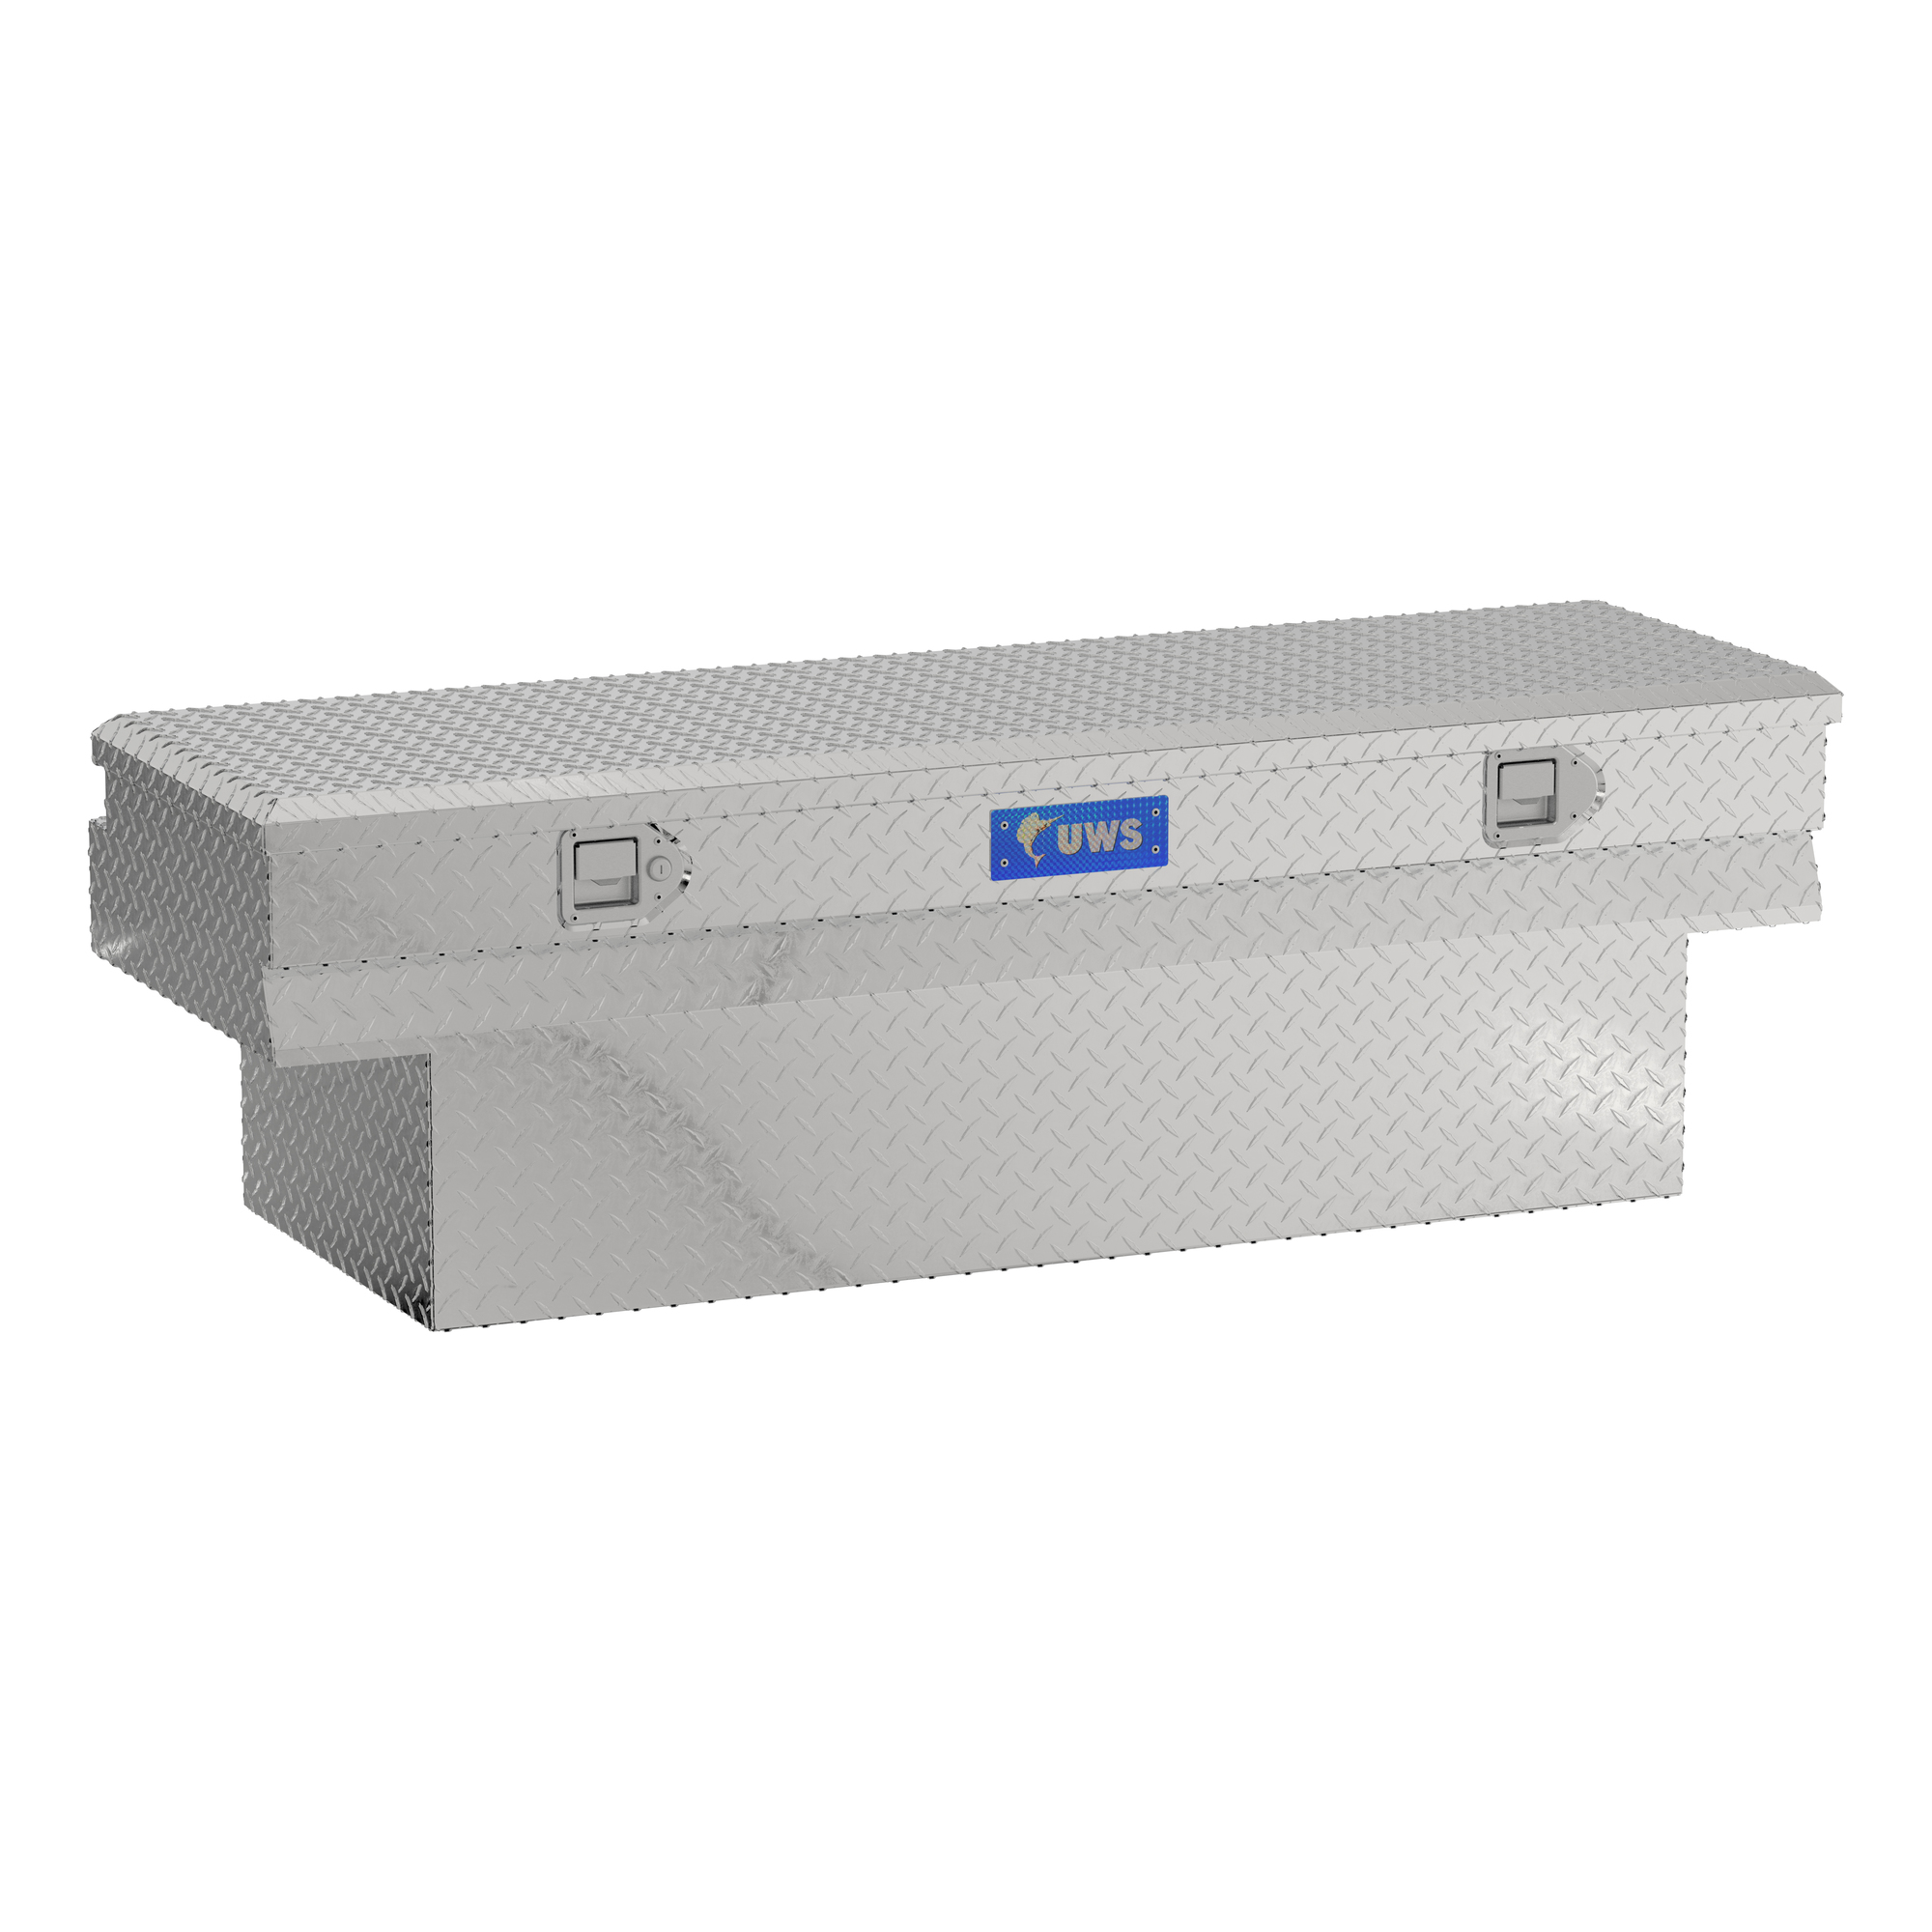 UWS, 60Inch Notched Utility Chest Box, Width 59.875 in, Material Aluminum, Color Finish Bright Aluminum, Model EC20331